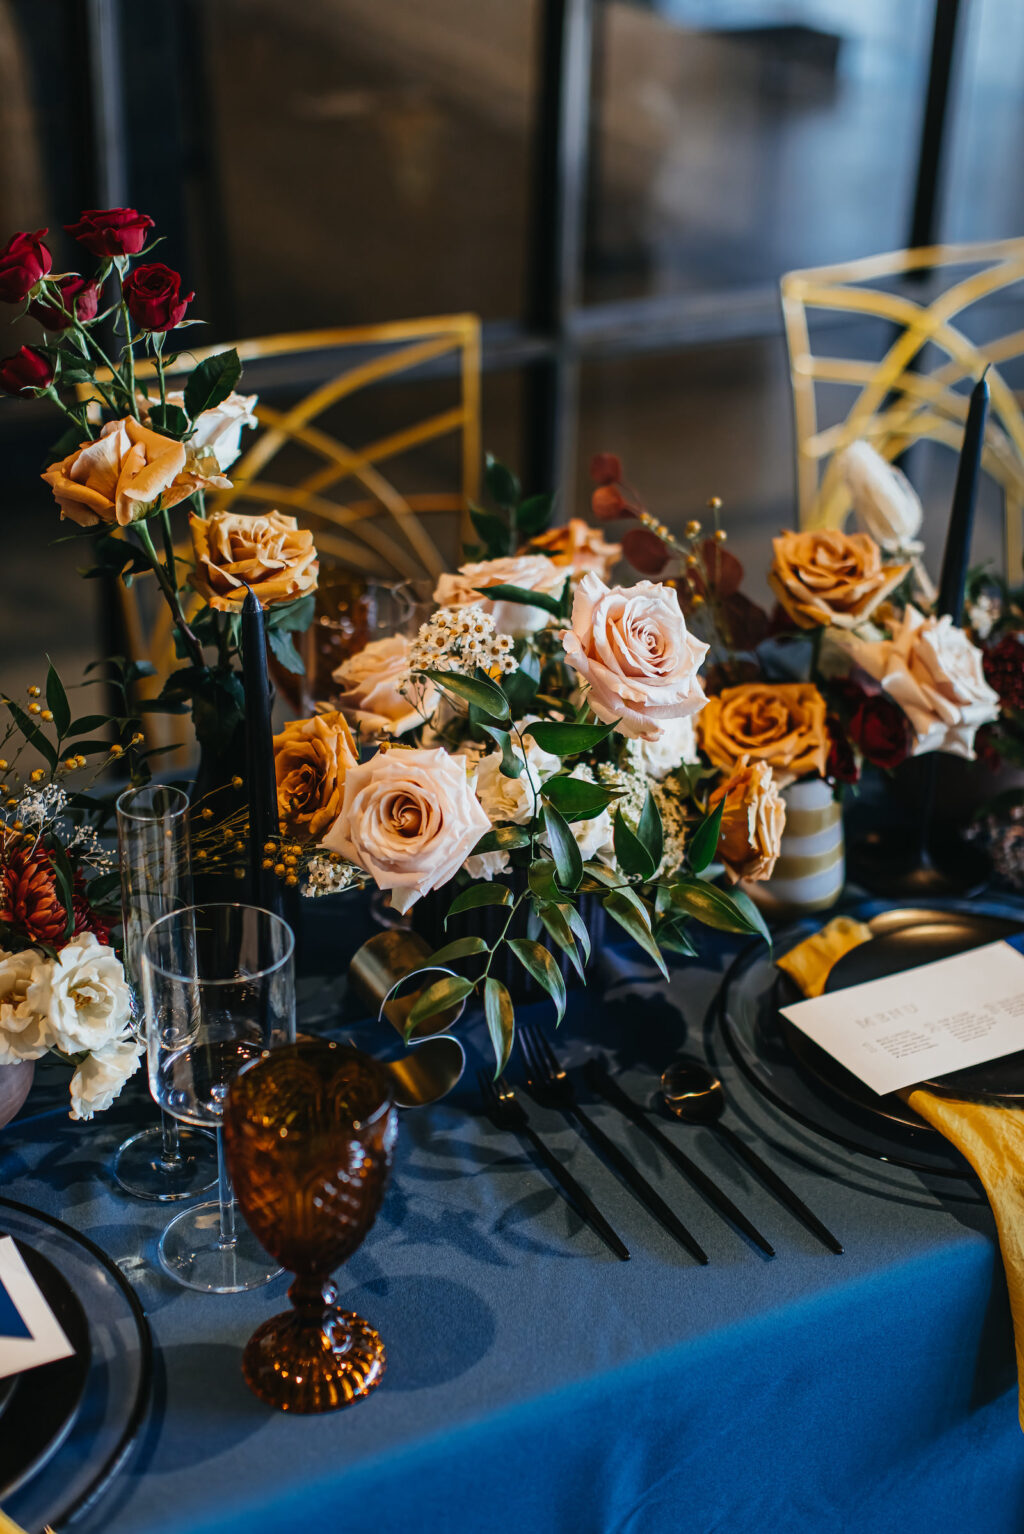 Modern and Edgy Fall Wedding Reception Decor, Royal Blue Table Linen, Vintage Water Goblets, Black Flatware, Blush Pink and Yellow Roses Flower Low Centerpieces | Tampa Bay Wedding Rentals Kate Ryan Event Rentals